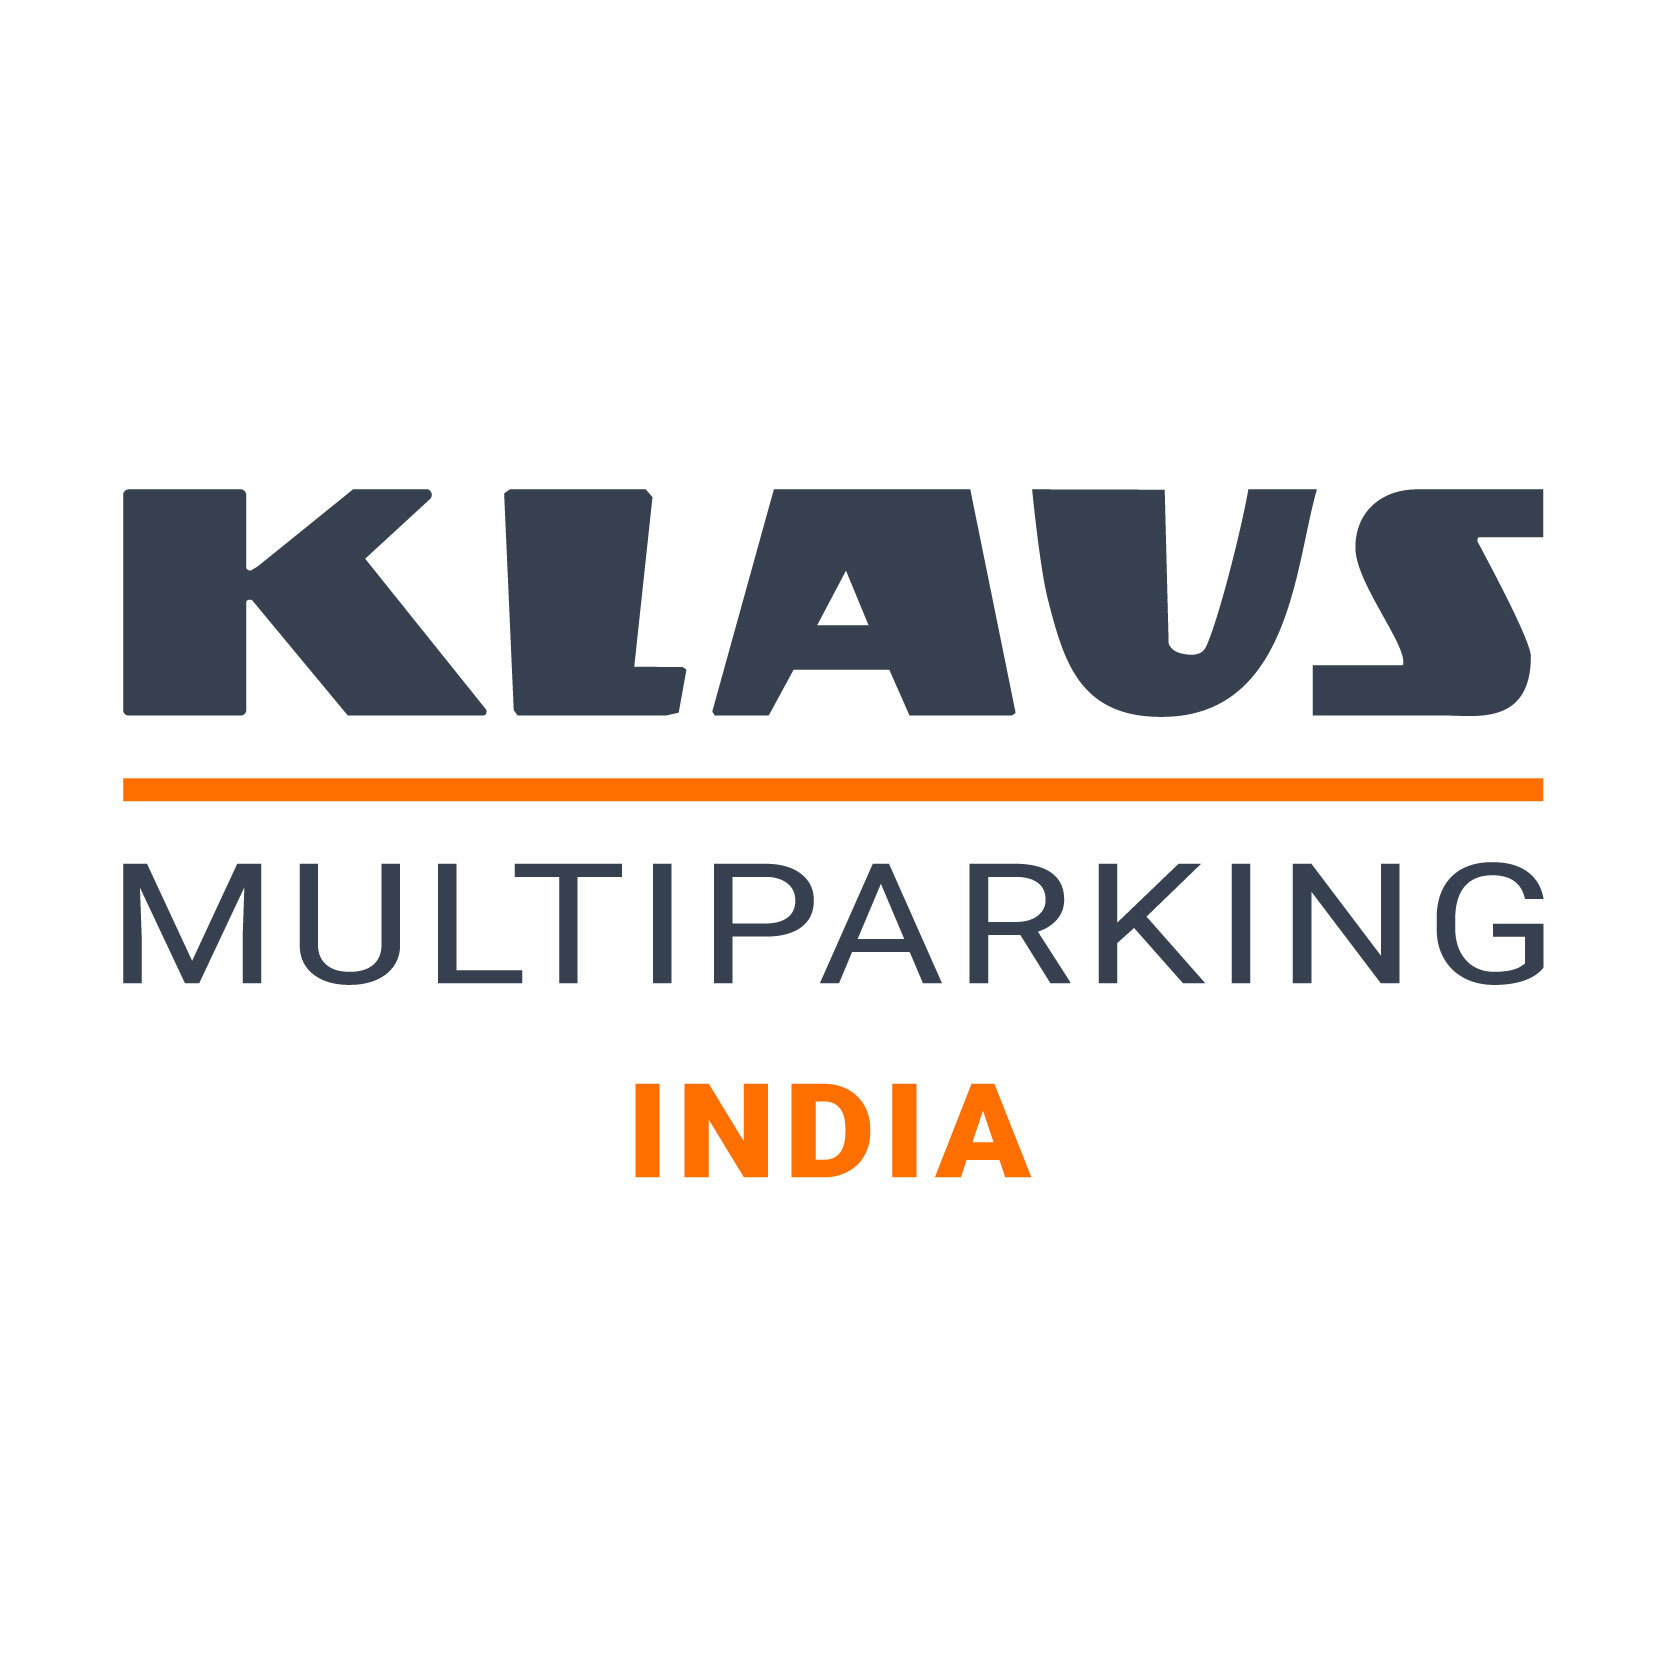 Best Car Parking Systems in India  KLAUS Multiparking - Maharashtra - Pune ID1551343 1